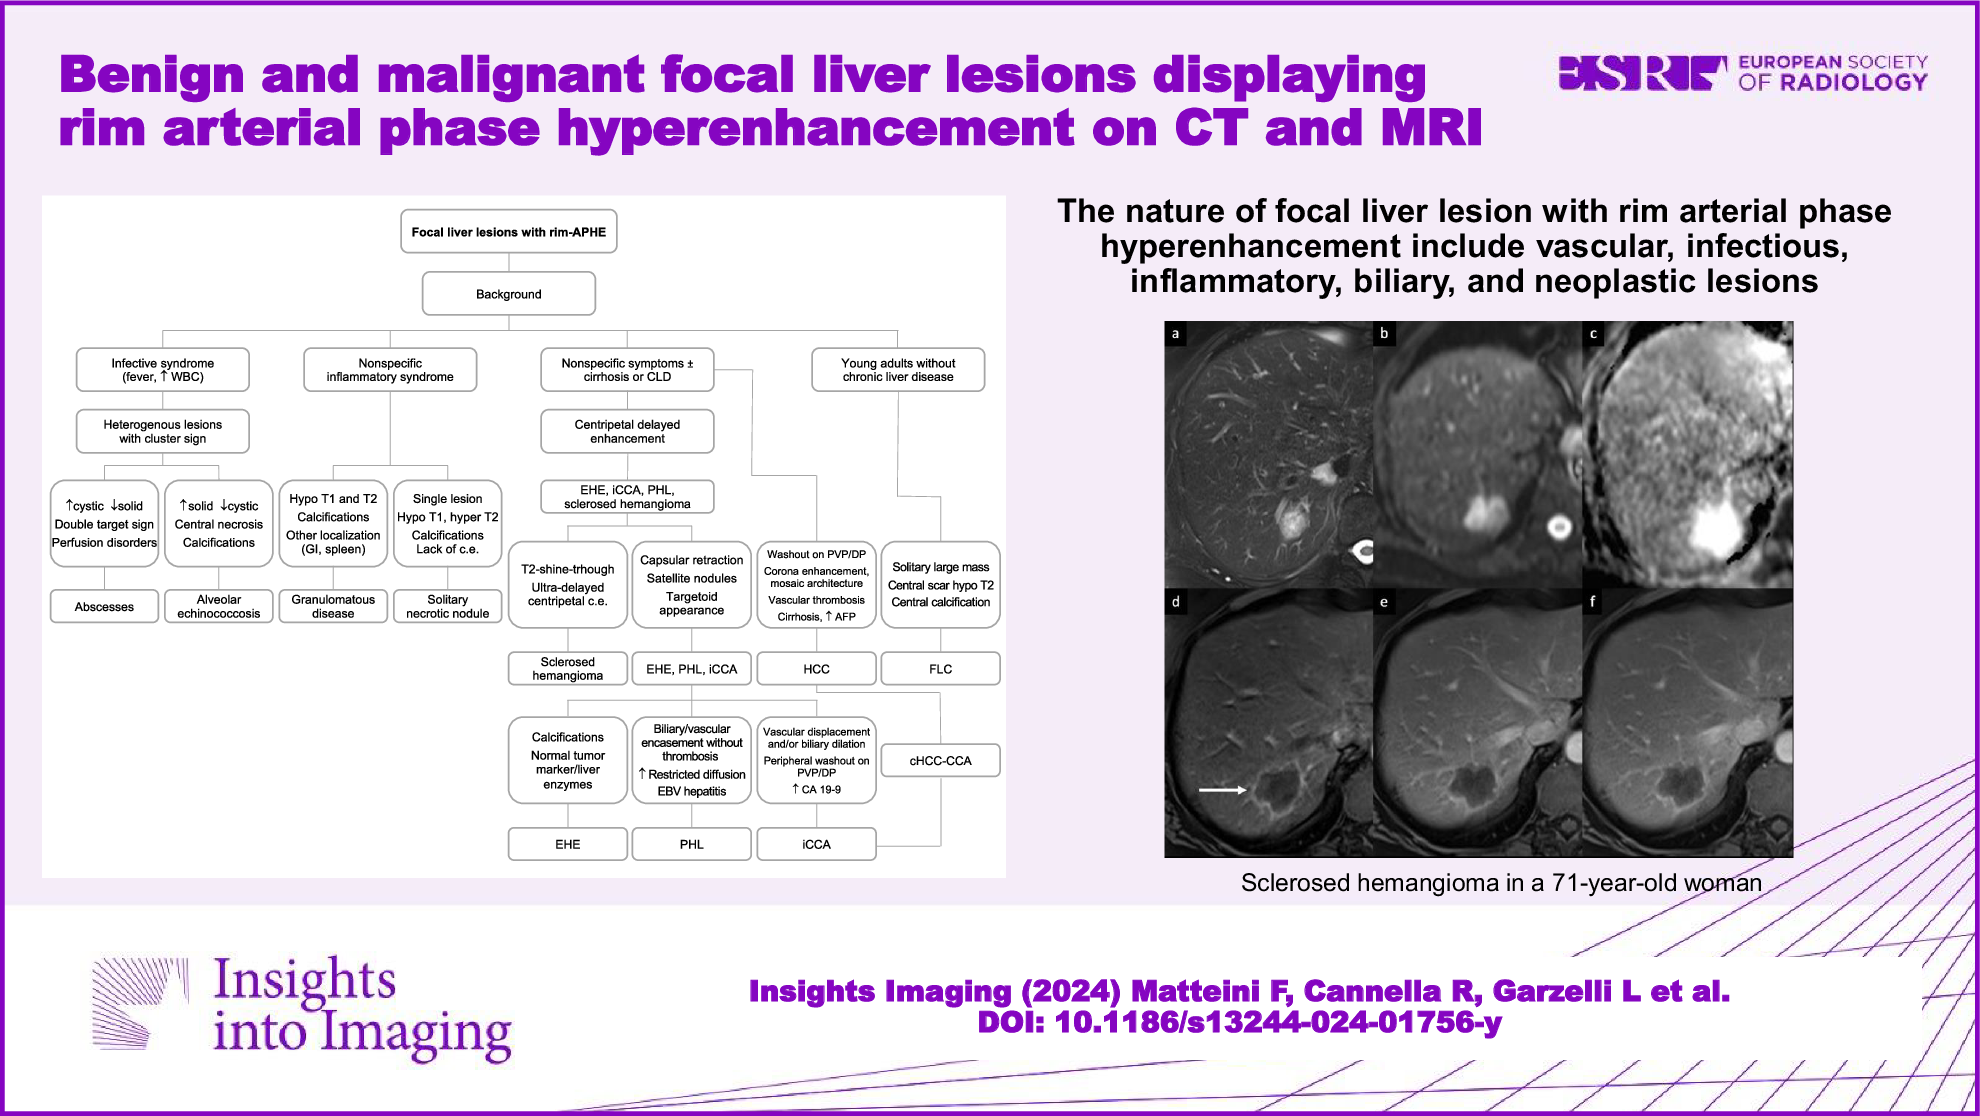 Benign and malignant focal liver lesions displaying rim arterial phase hyperenhancement on CT and MRI